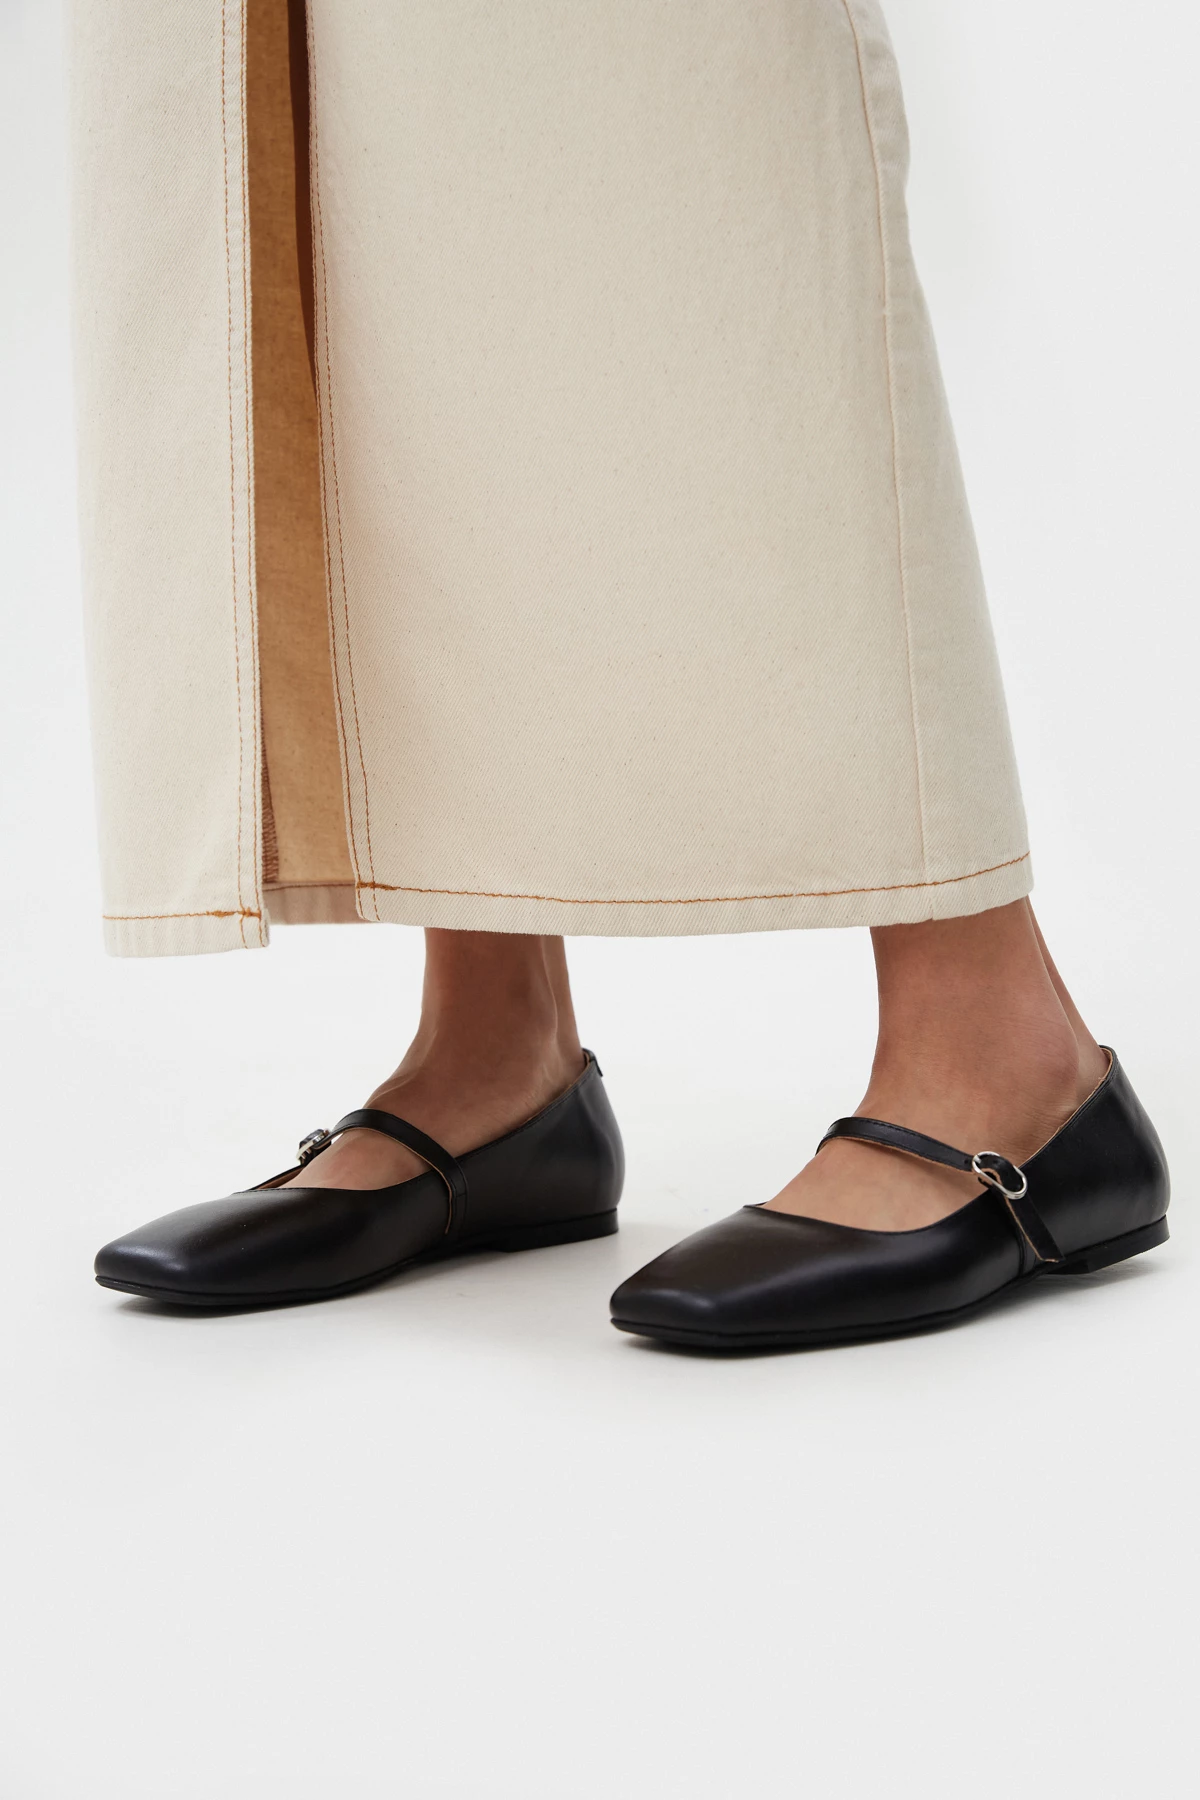 Black Mary Jane ballet flats made of genuine leather, photo 6